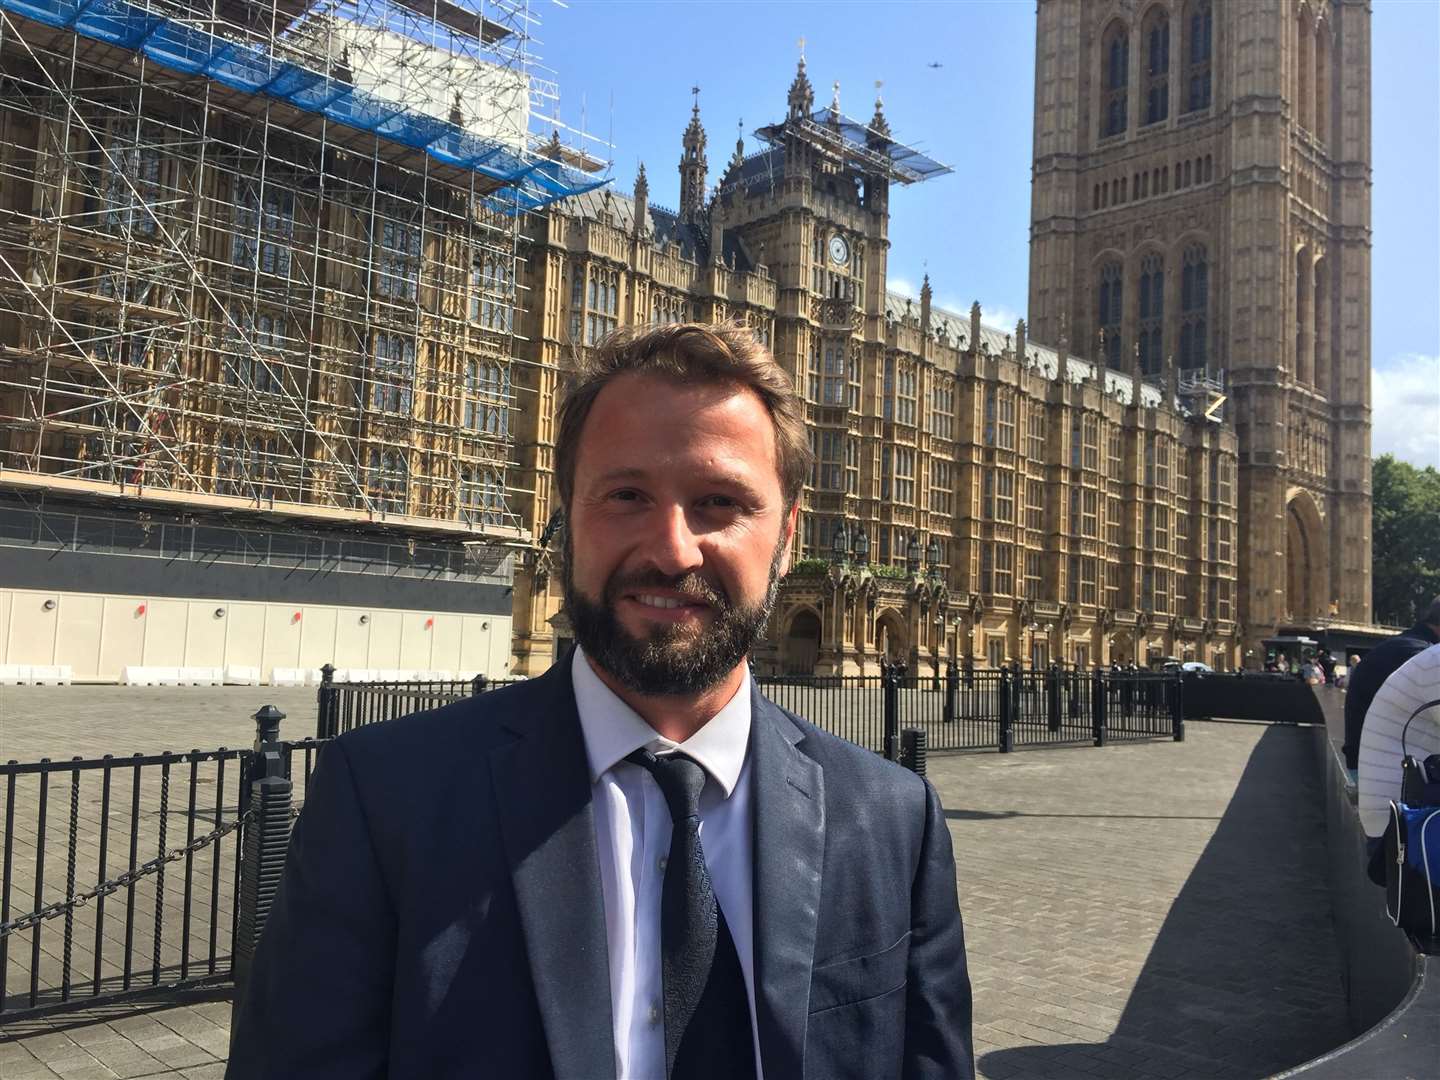 Owen Prew of the Brexit Party has stepped down as candidate for Canterbury and Whitstable